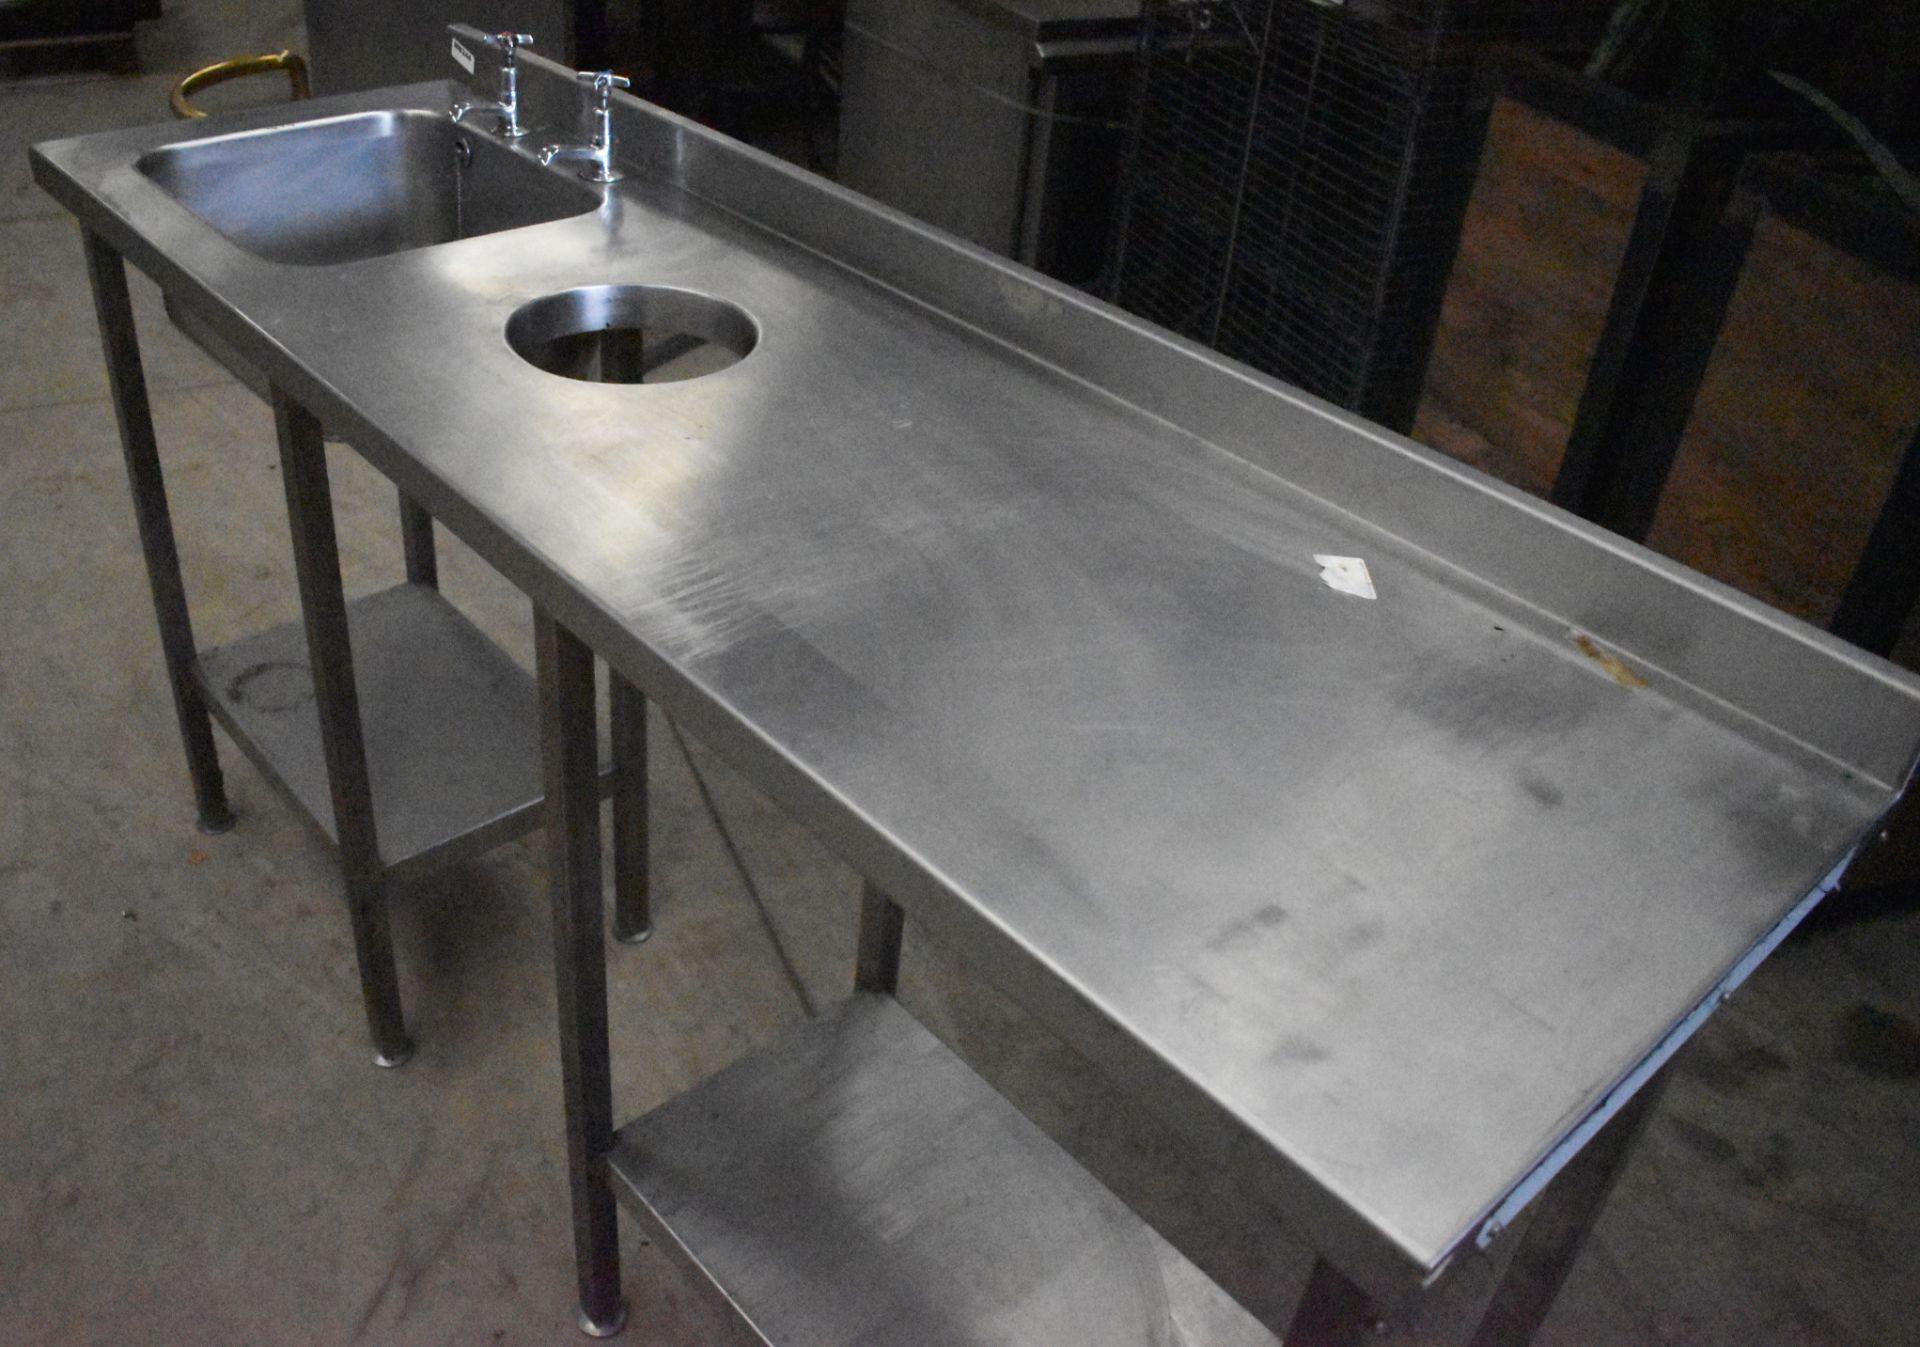 1 x Stainless Steel Wash Basin Prep Table With Undershelves, Upstand, Basin and Taps and Waste Chute - Image 3 of 5